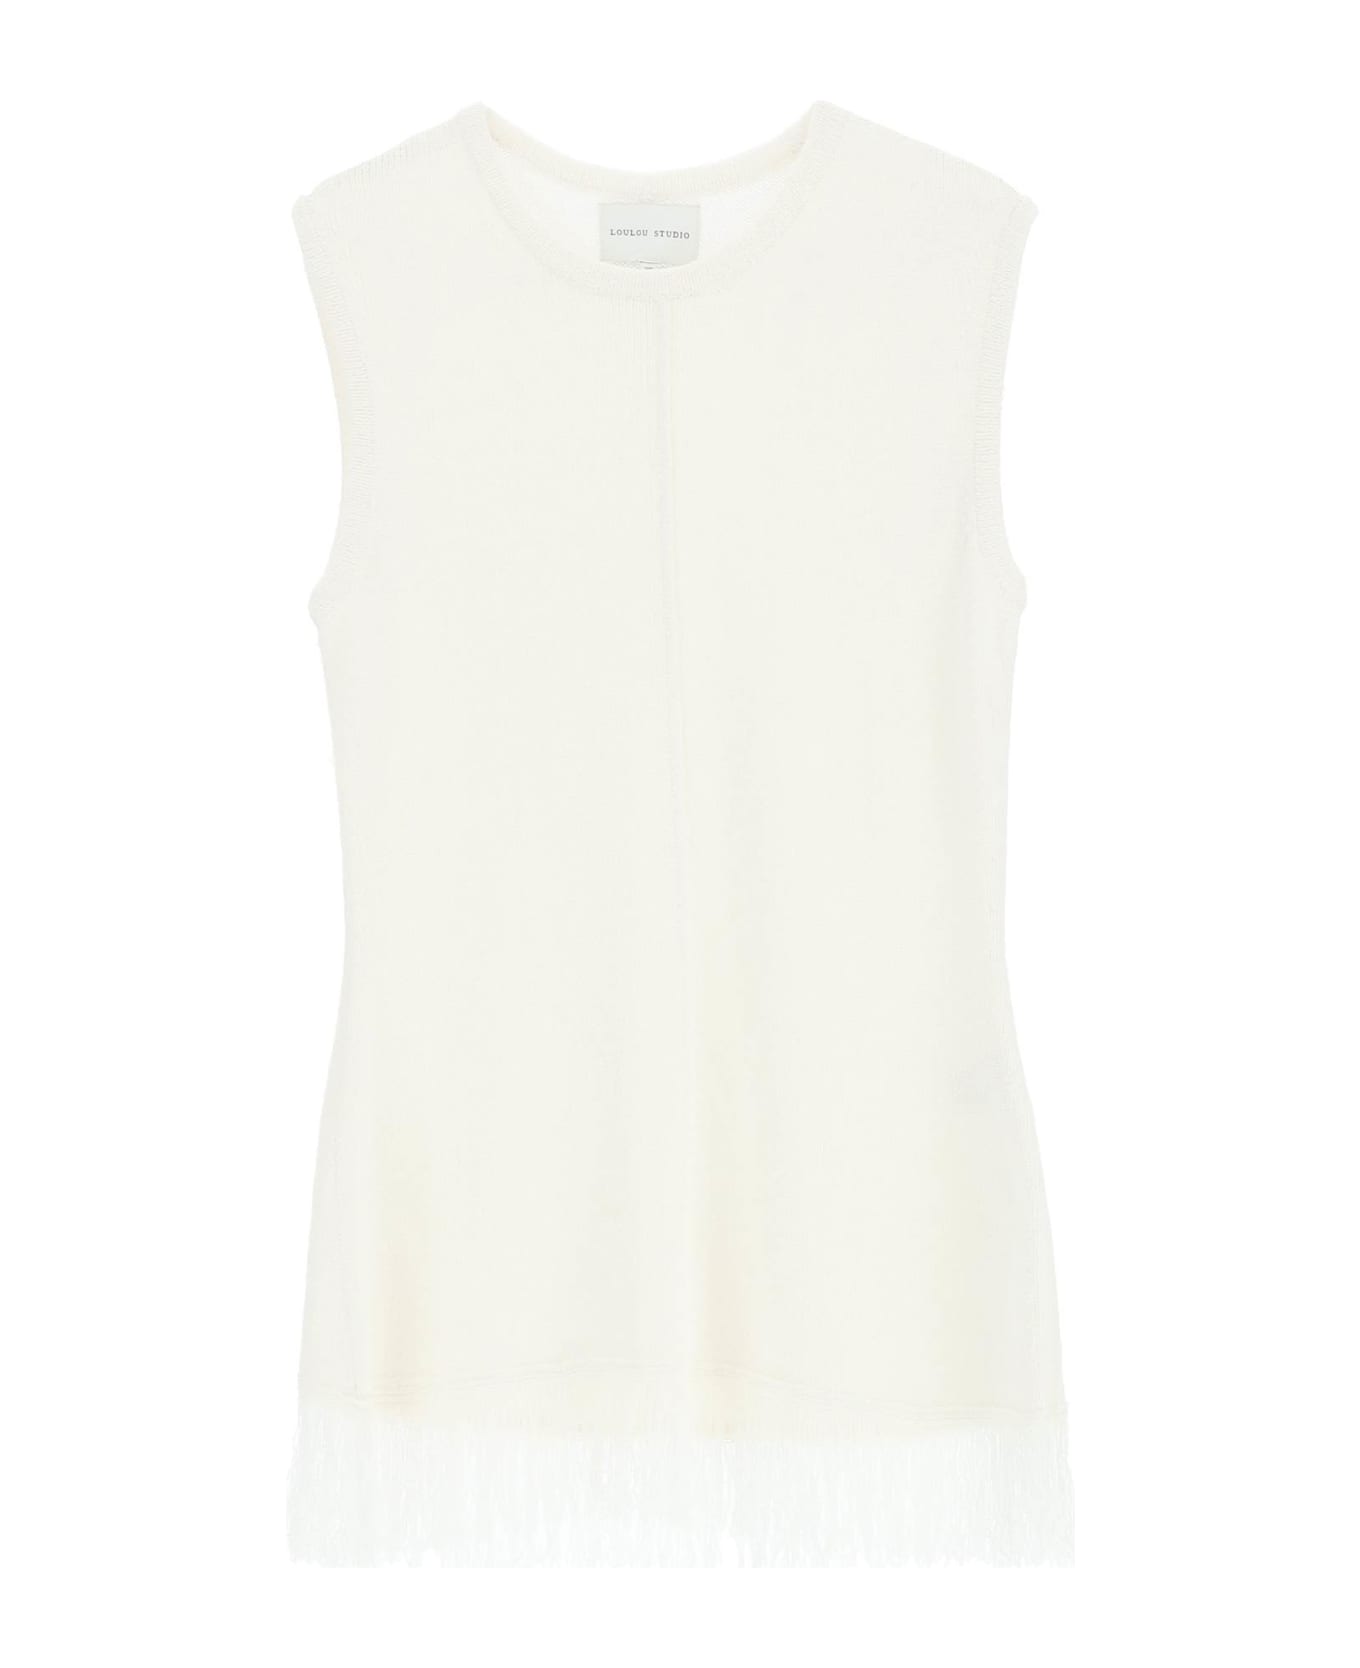 Loulou Studio Fringed Bouclé Knit Top - IVORY (White) タンクトップ